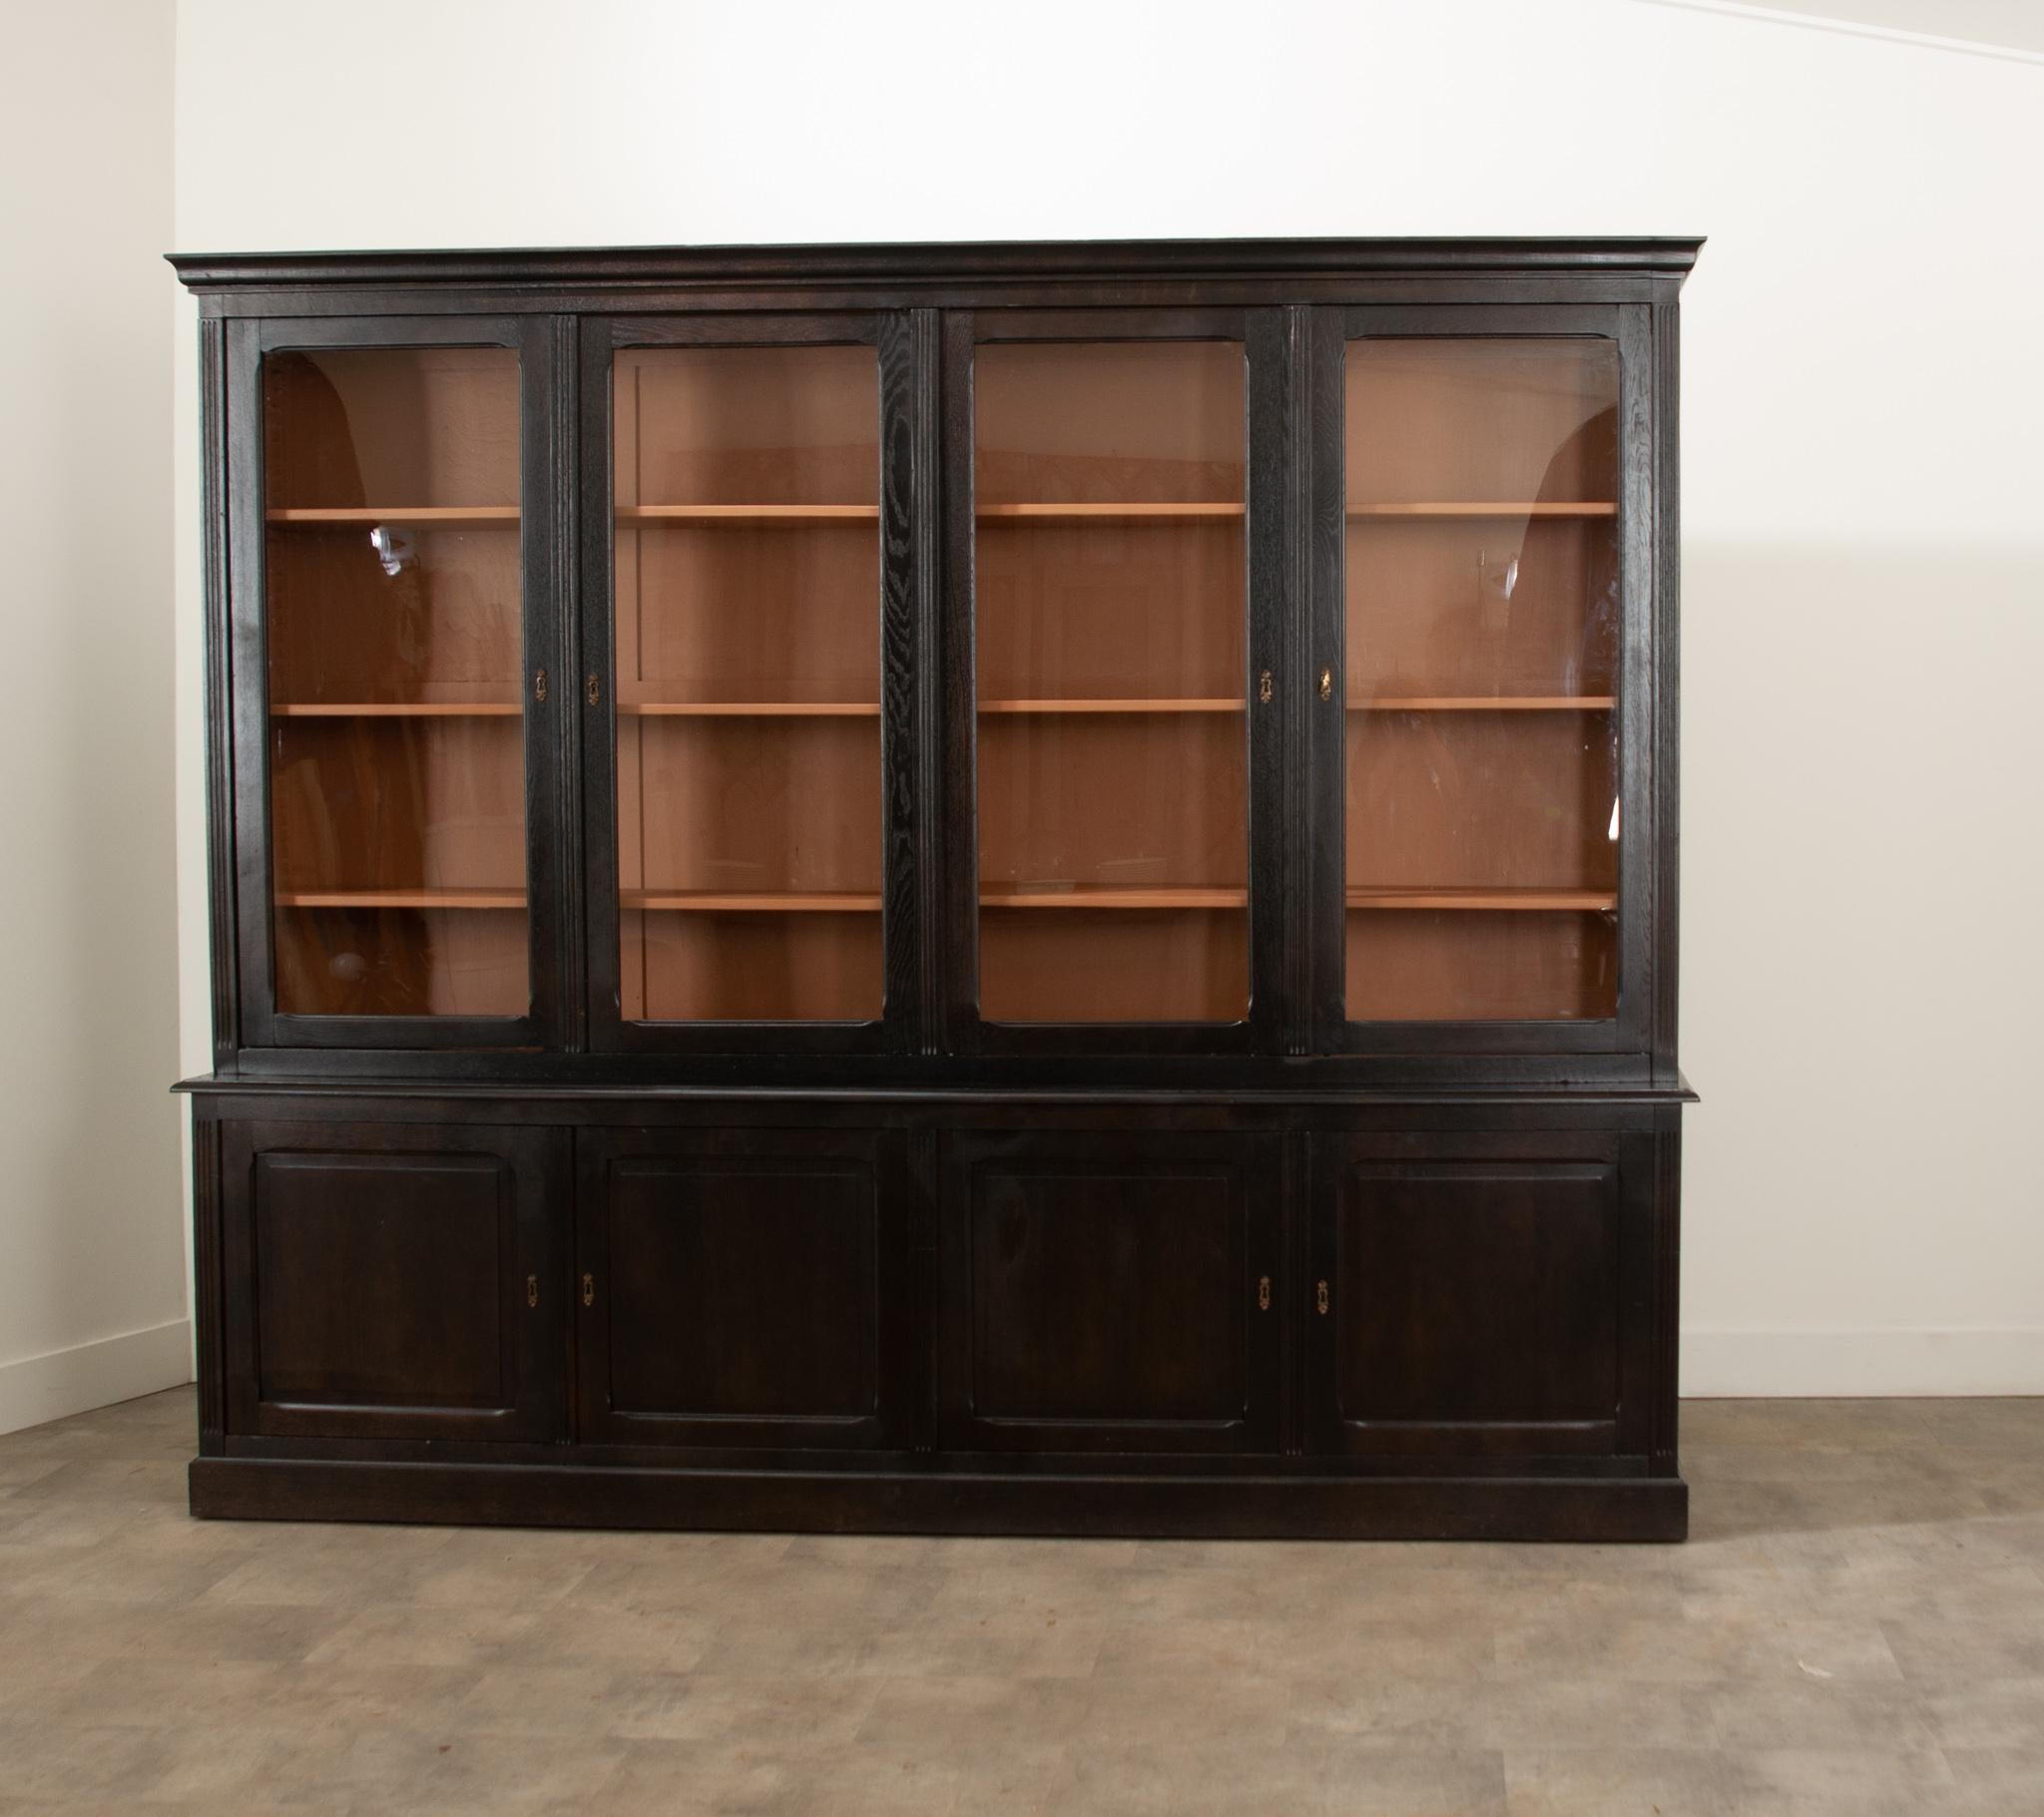 A beautiful and sizable French 19th century bibliotheque. The four trimmed glass front, locking and latching upper doors close before three saw-tooth adjustable shelves. The interior is painted a gorgeous dusty terracotta color by Benjamin Moore